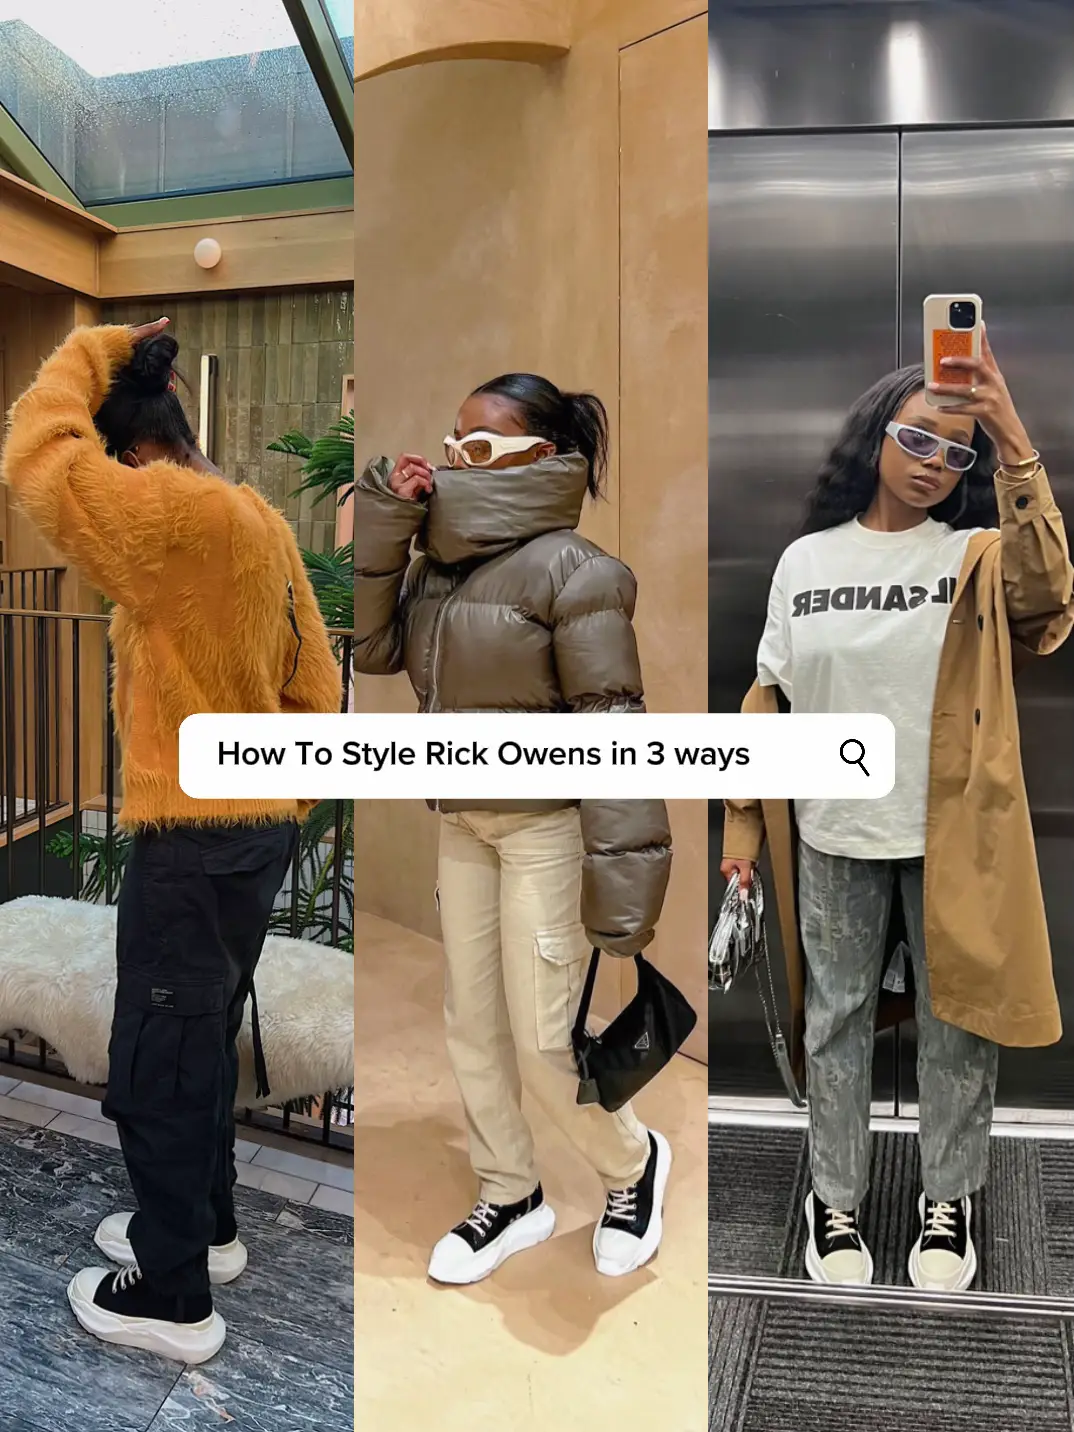 How to Style Rick Owens #fashion #howtostyle #rickowens #outfitideas #, Styling Rick Owens